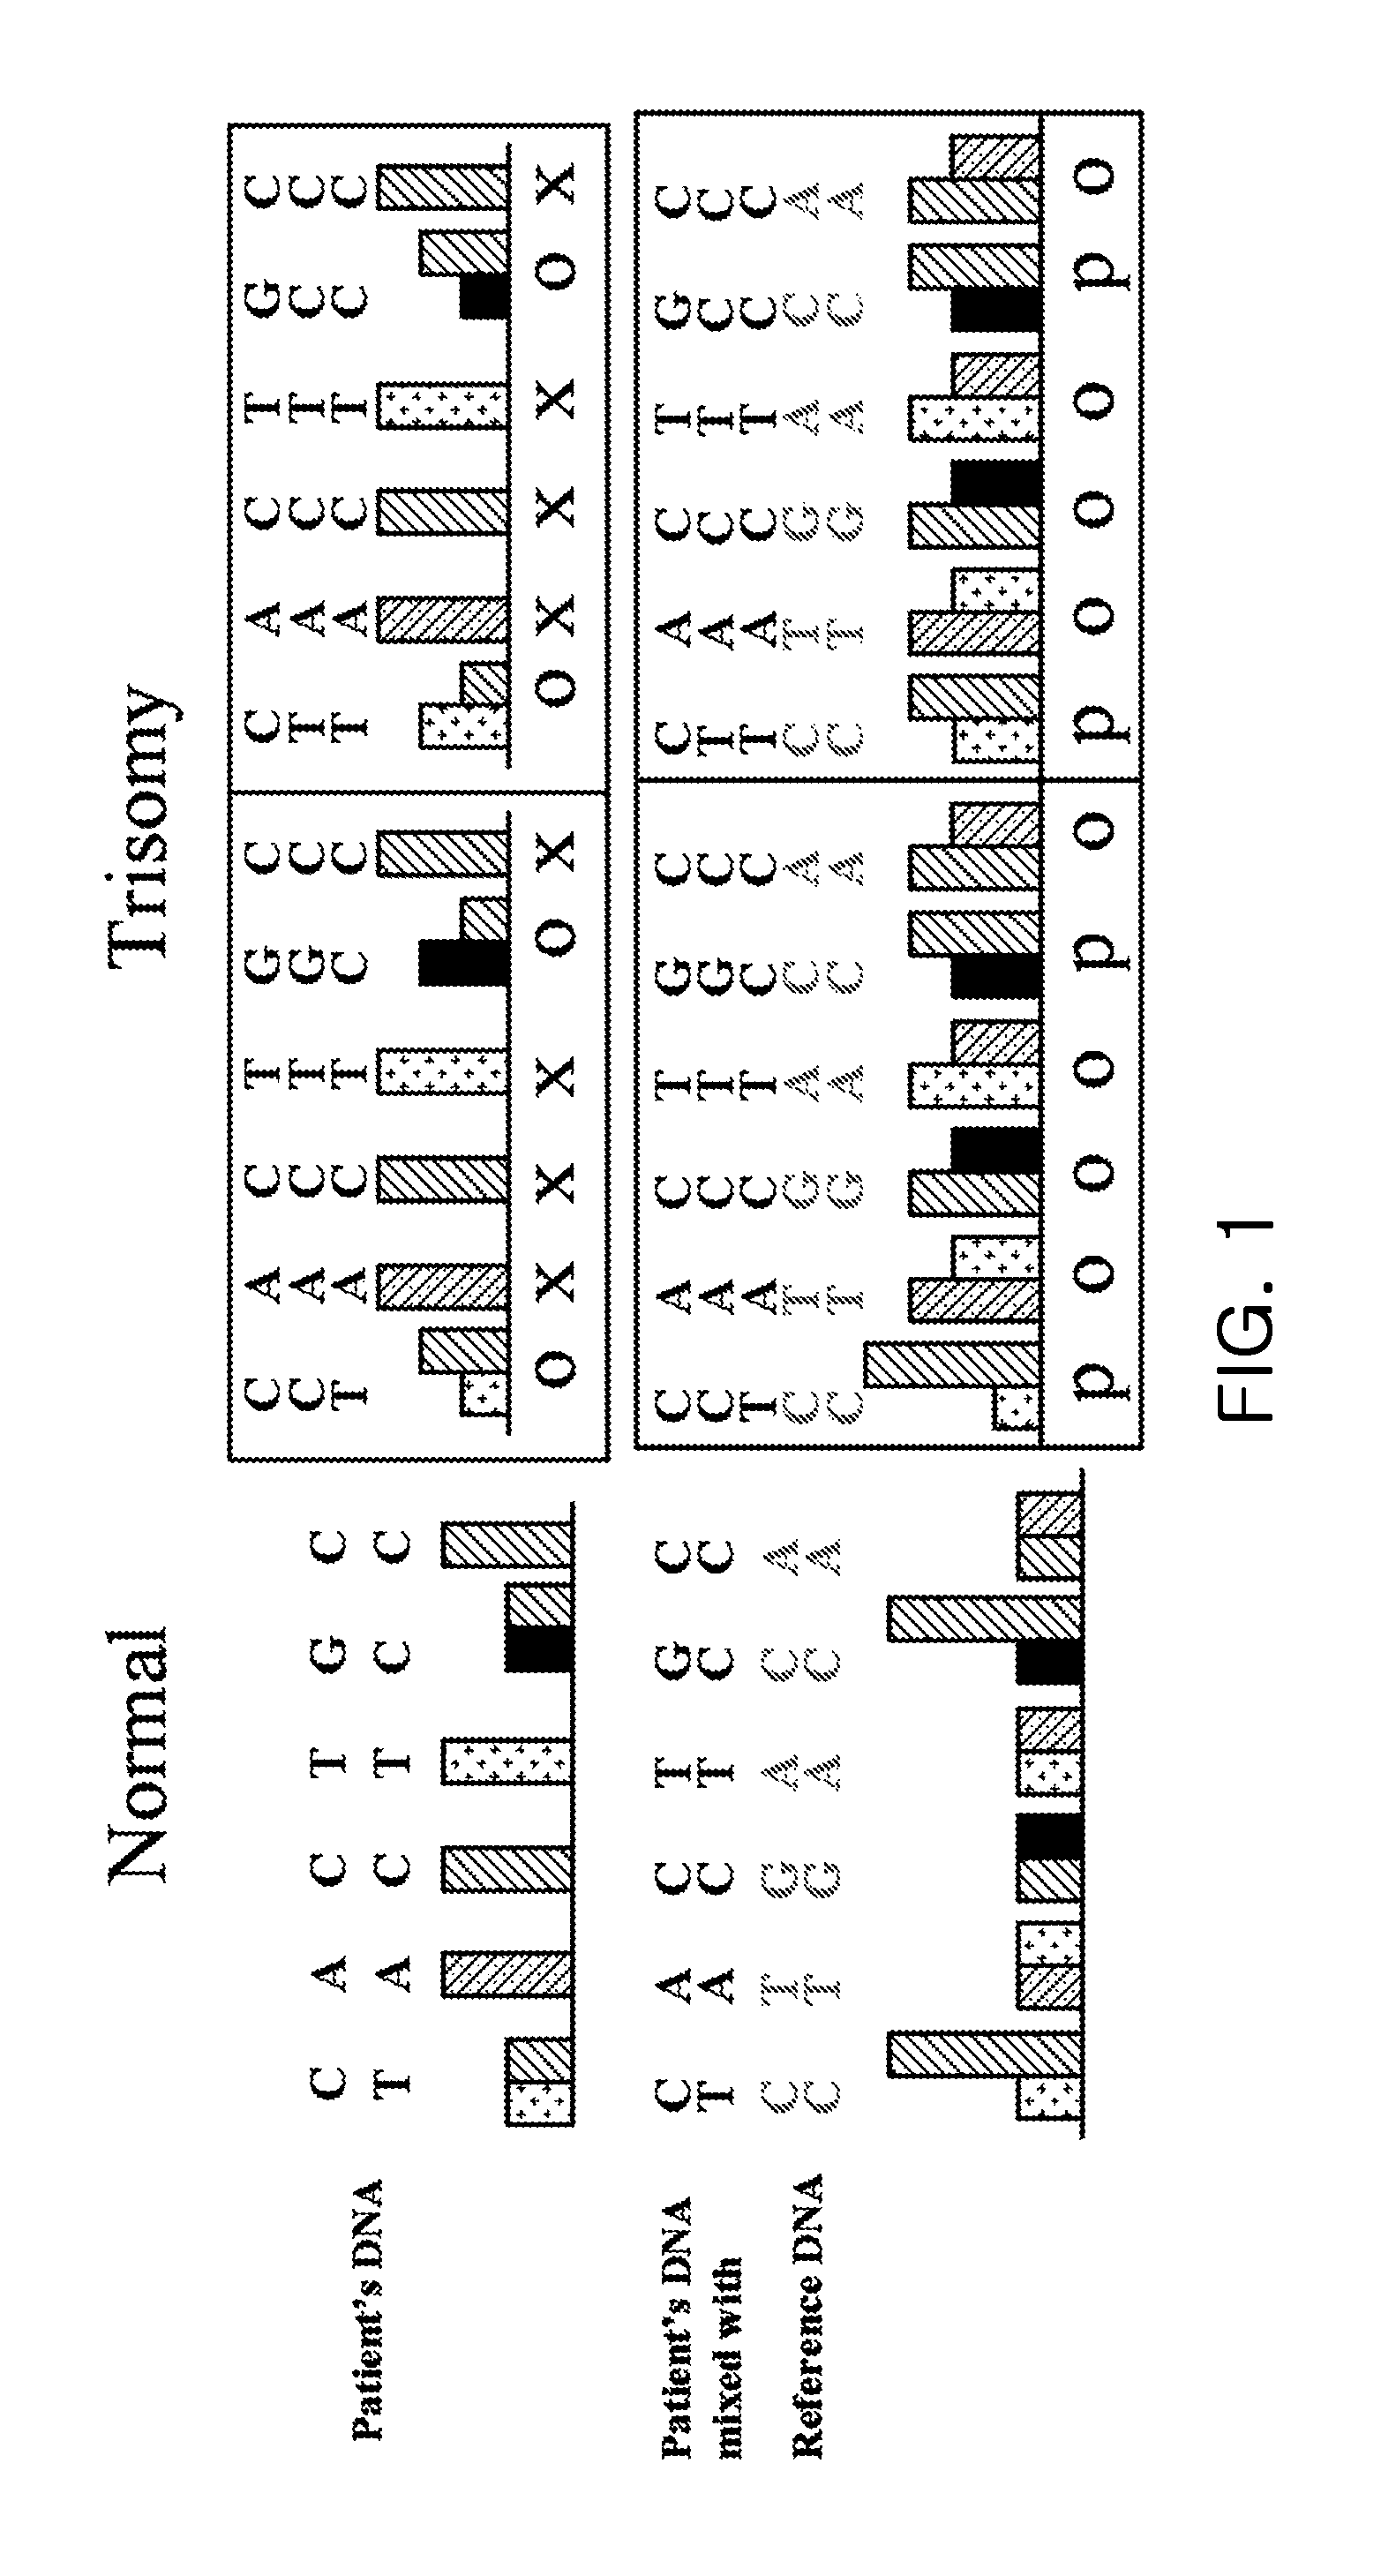 Method for measuring chromosome, gene or specific nucleotide sequence copy numbers using SNP array